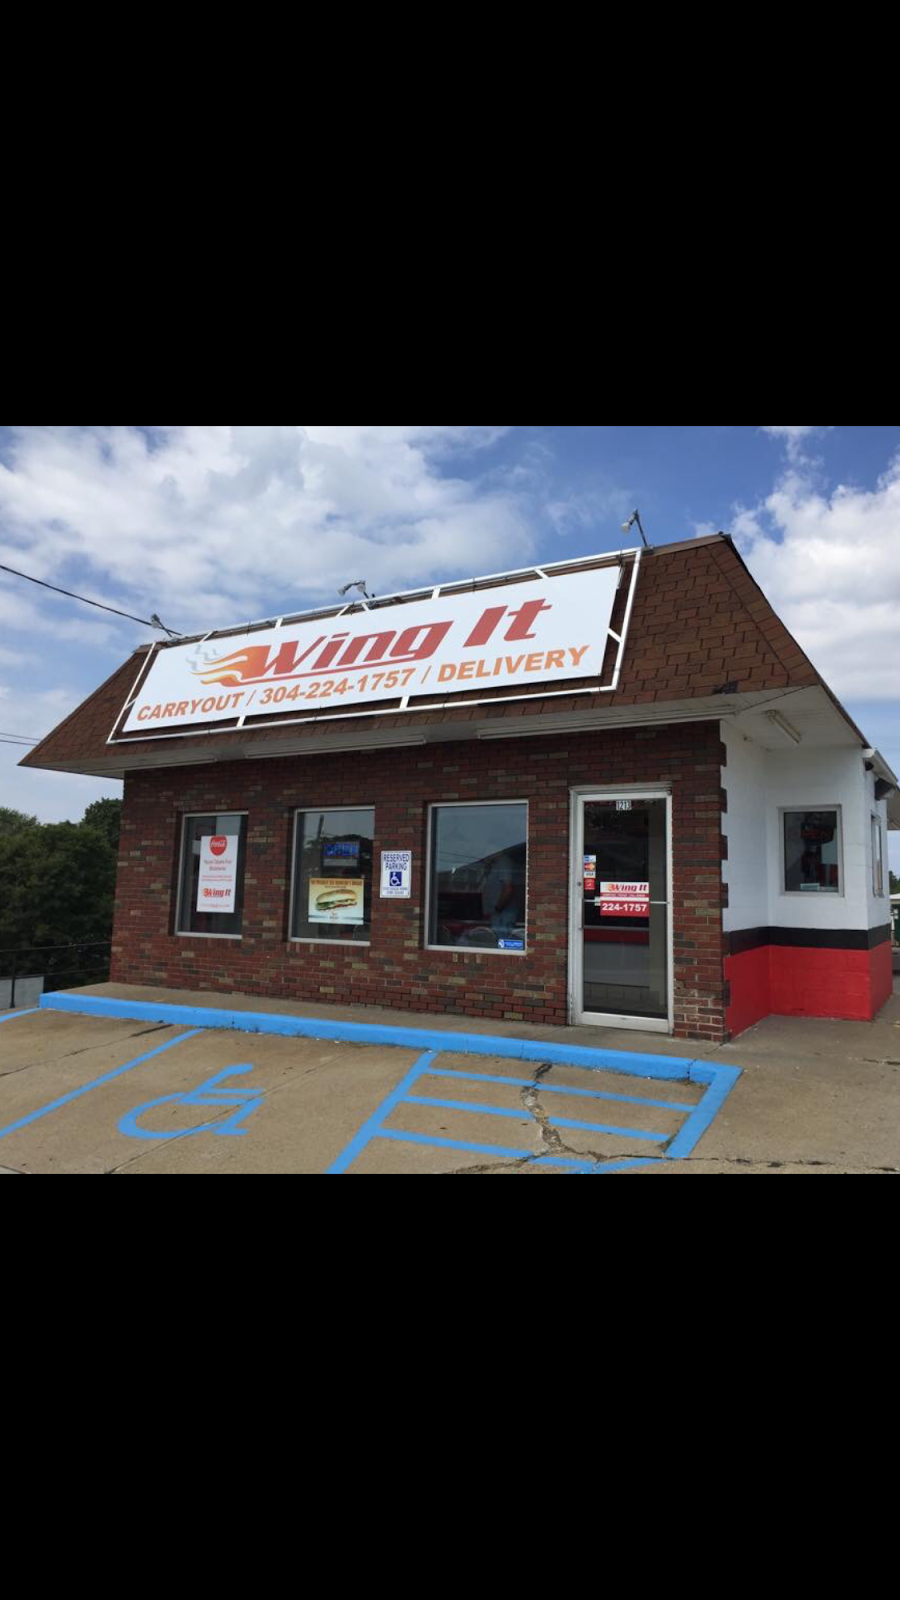 Wing It | 1325 Pennsylvania Ave, Weirton, WV 26062 | Phone: (304) 224-1757